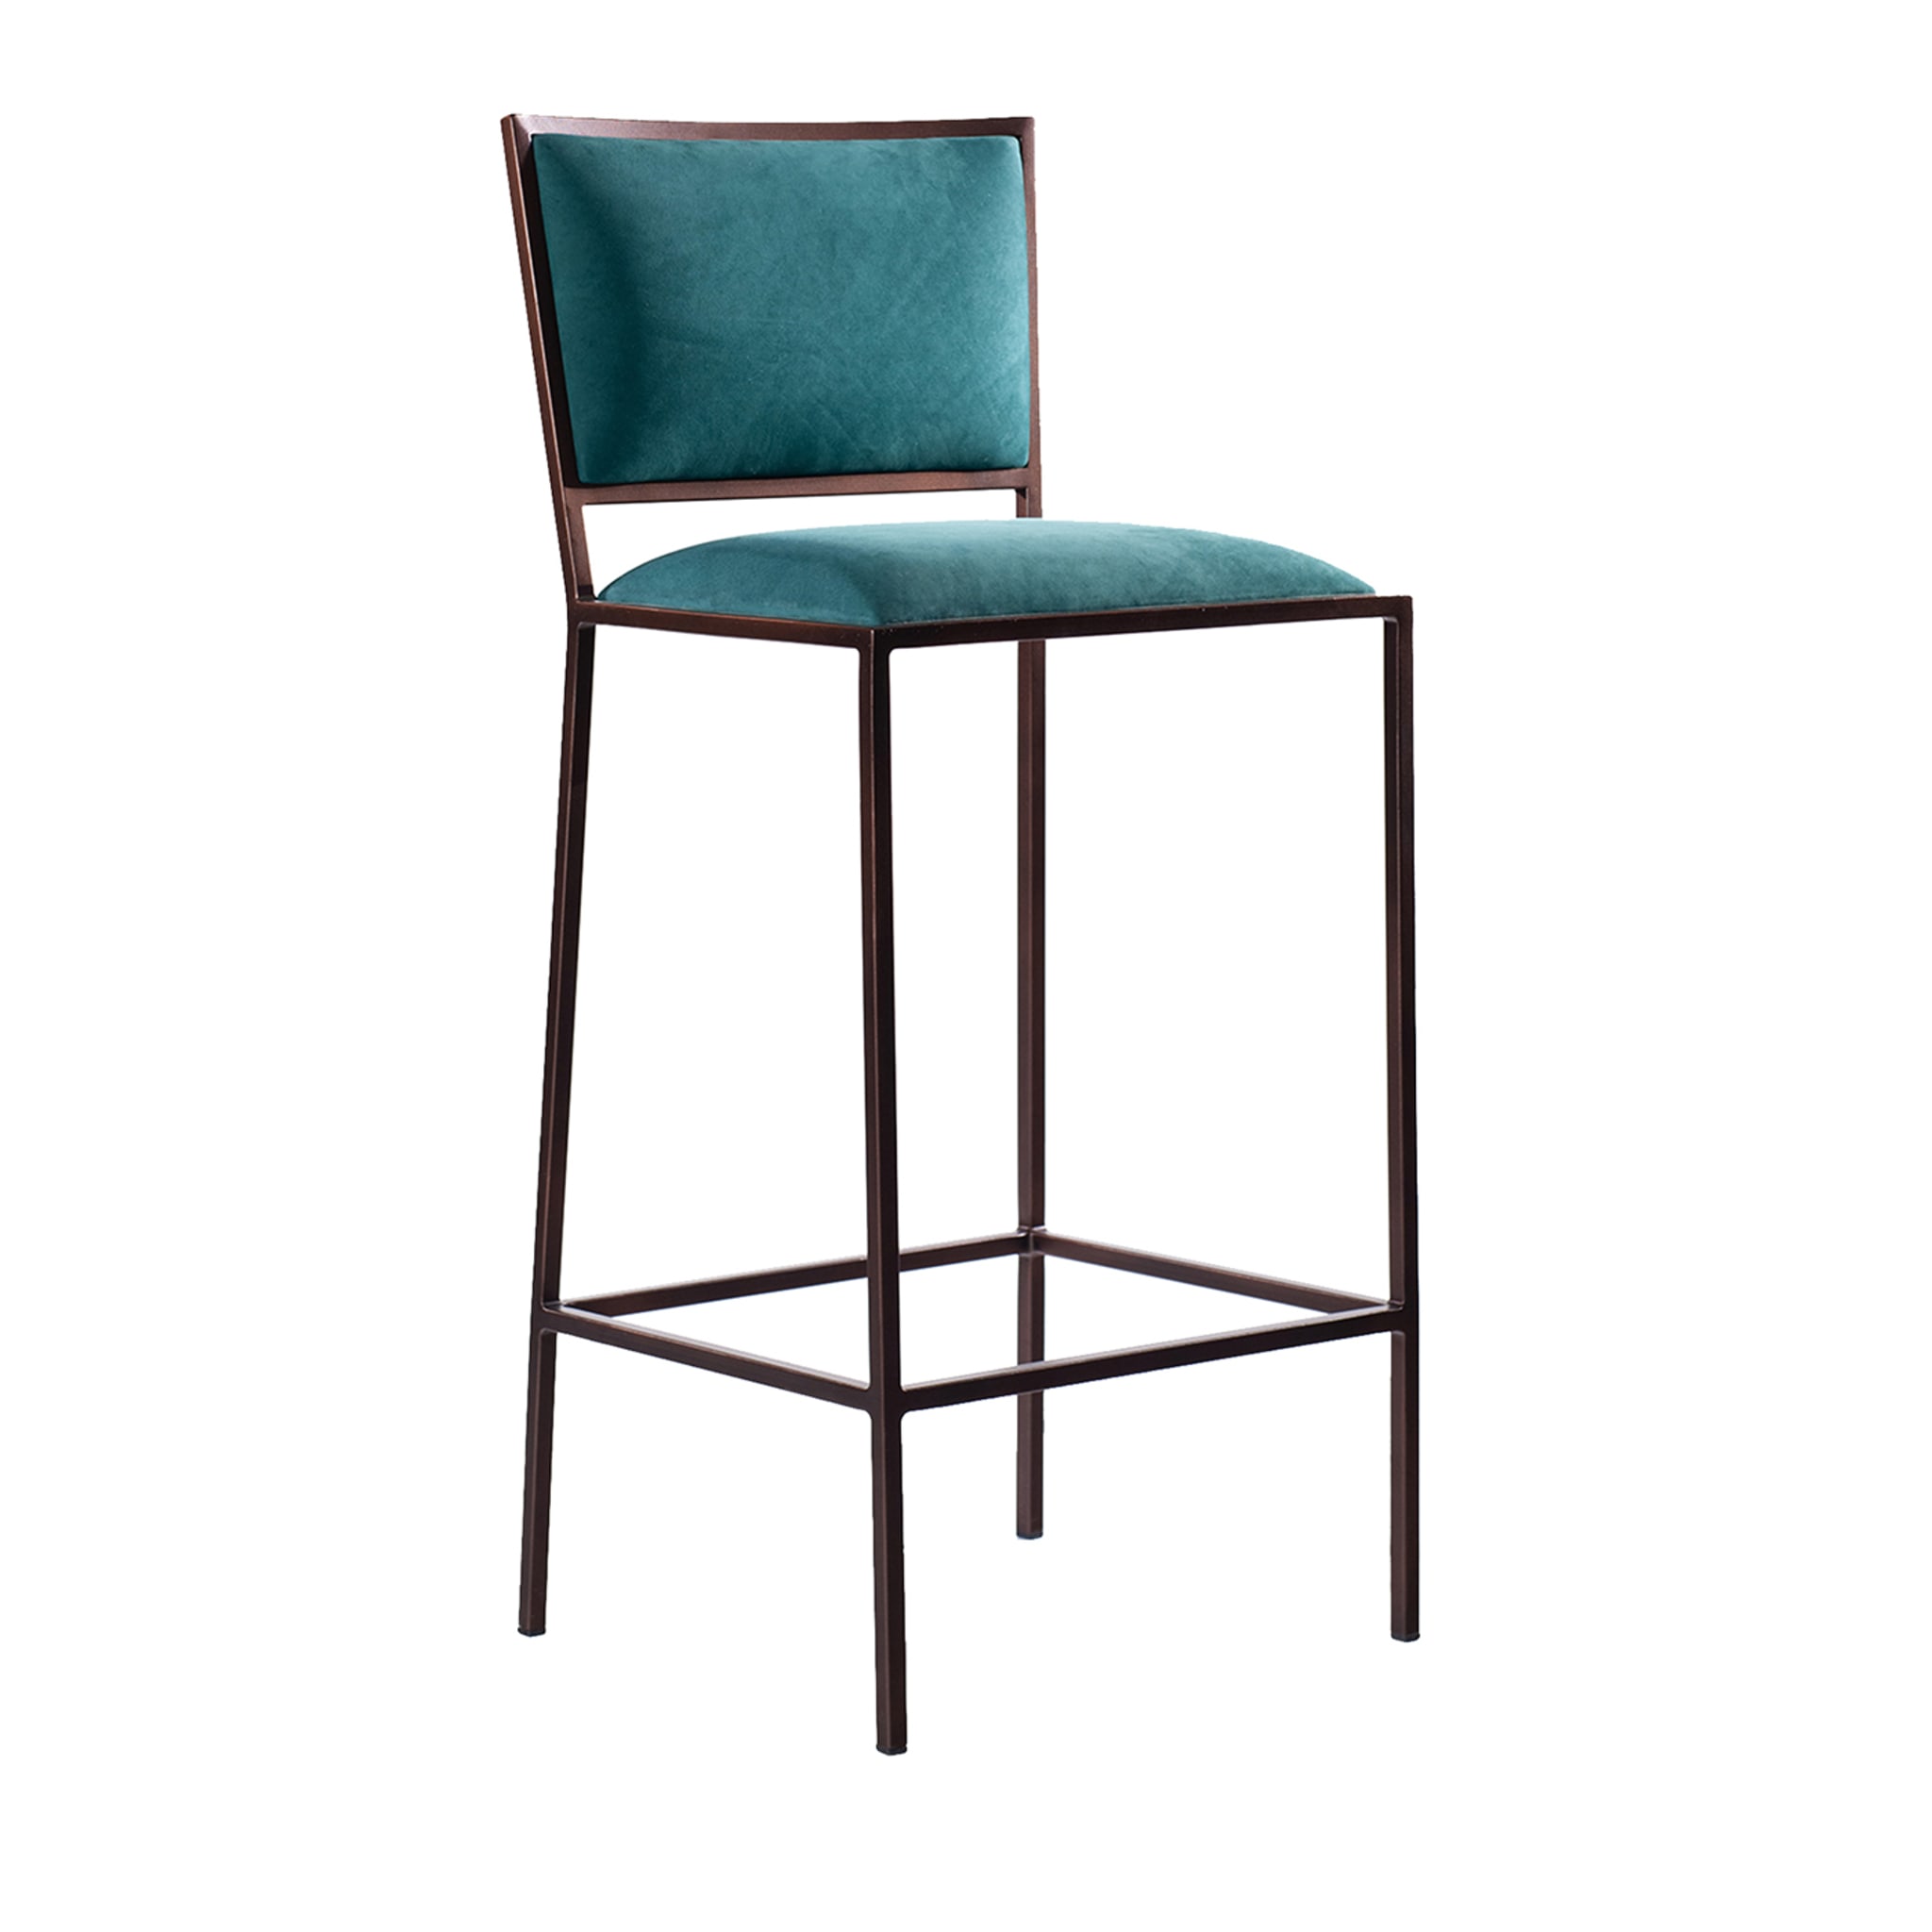 The Simple Bar Stool - Main view